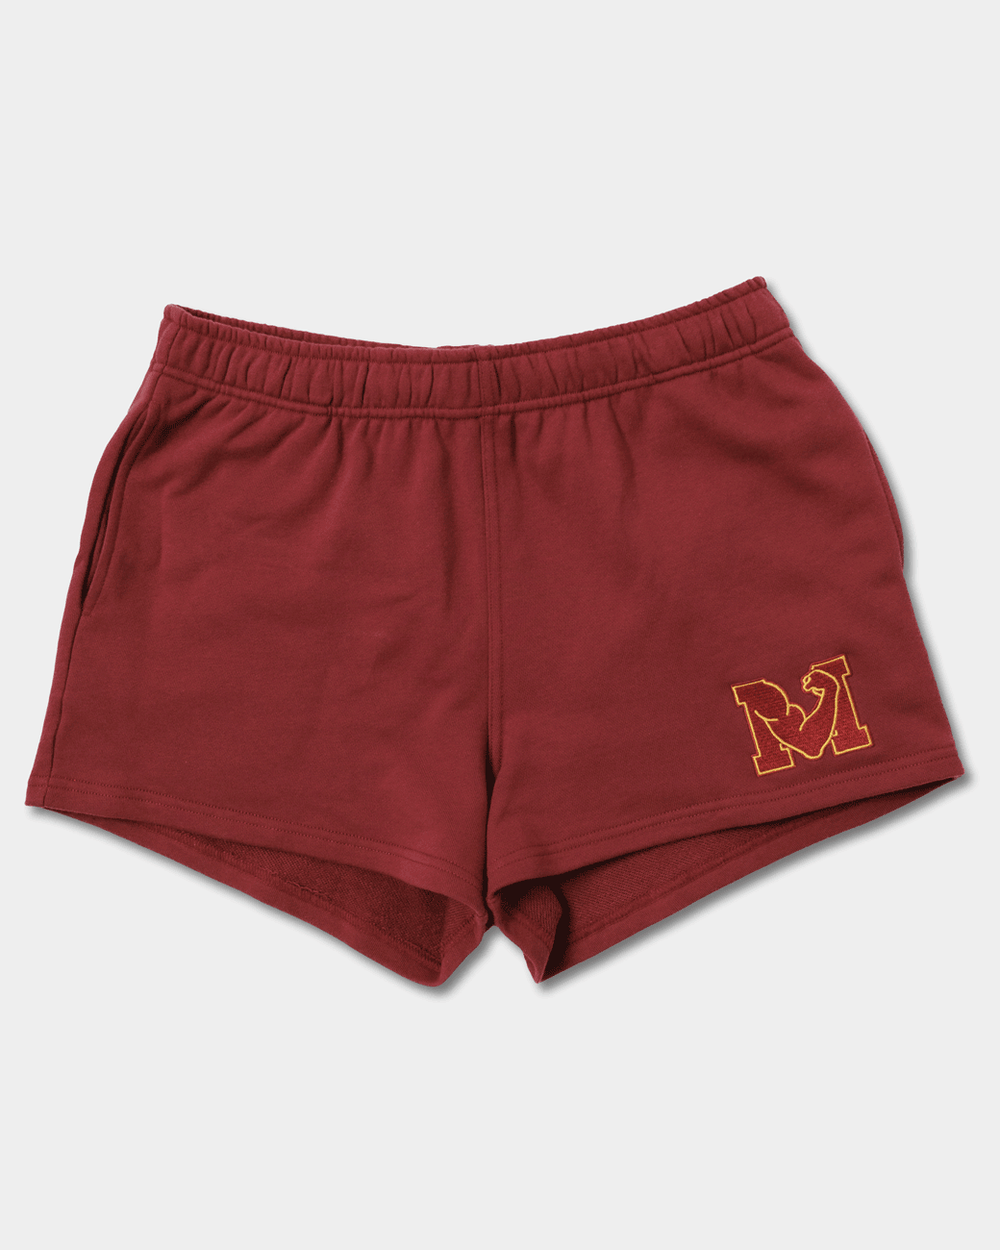 College Shorts - Maroon